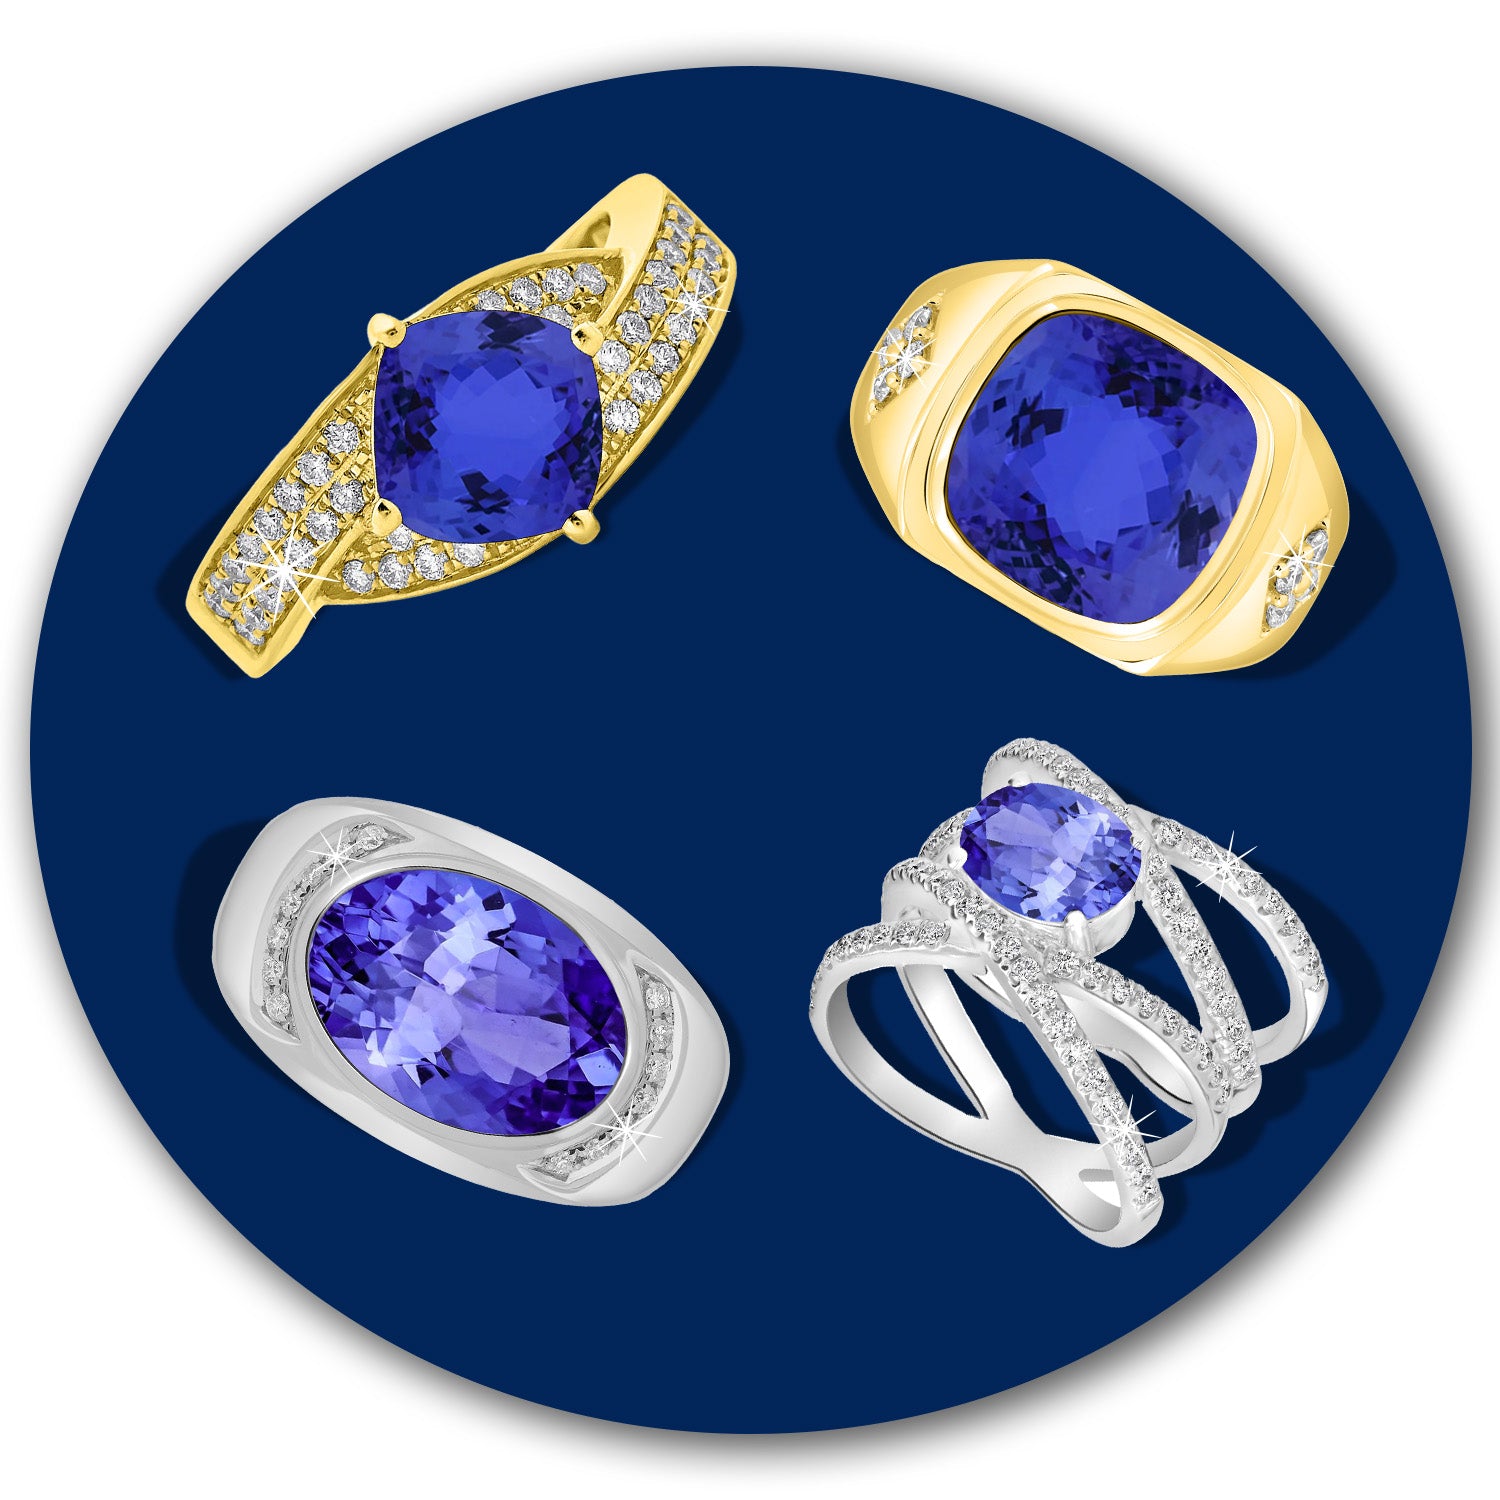 What To Look Out for When Buying a Tanzanite Ring